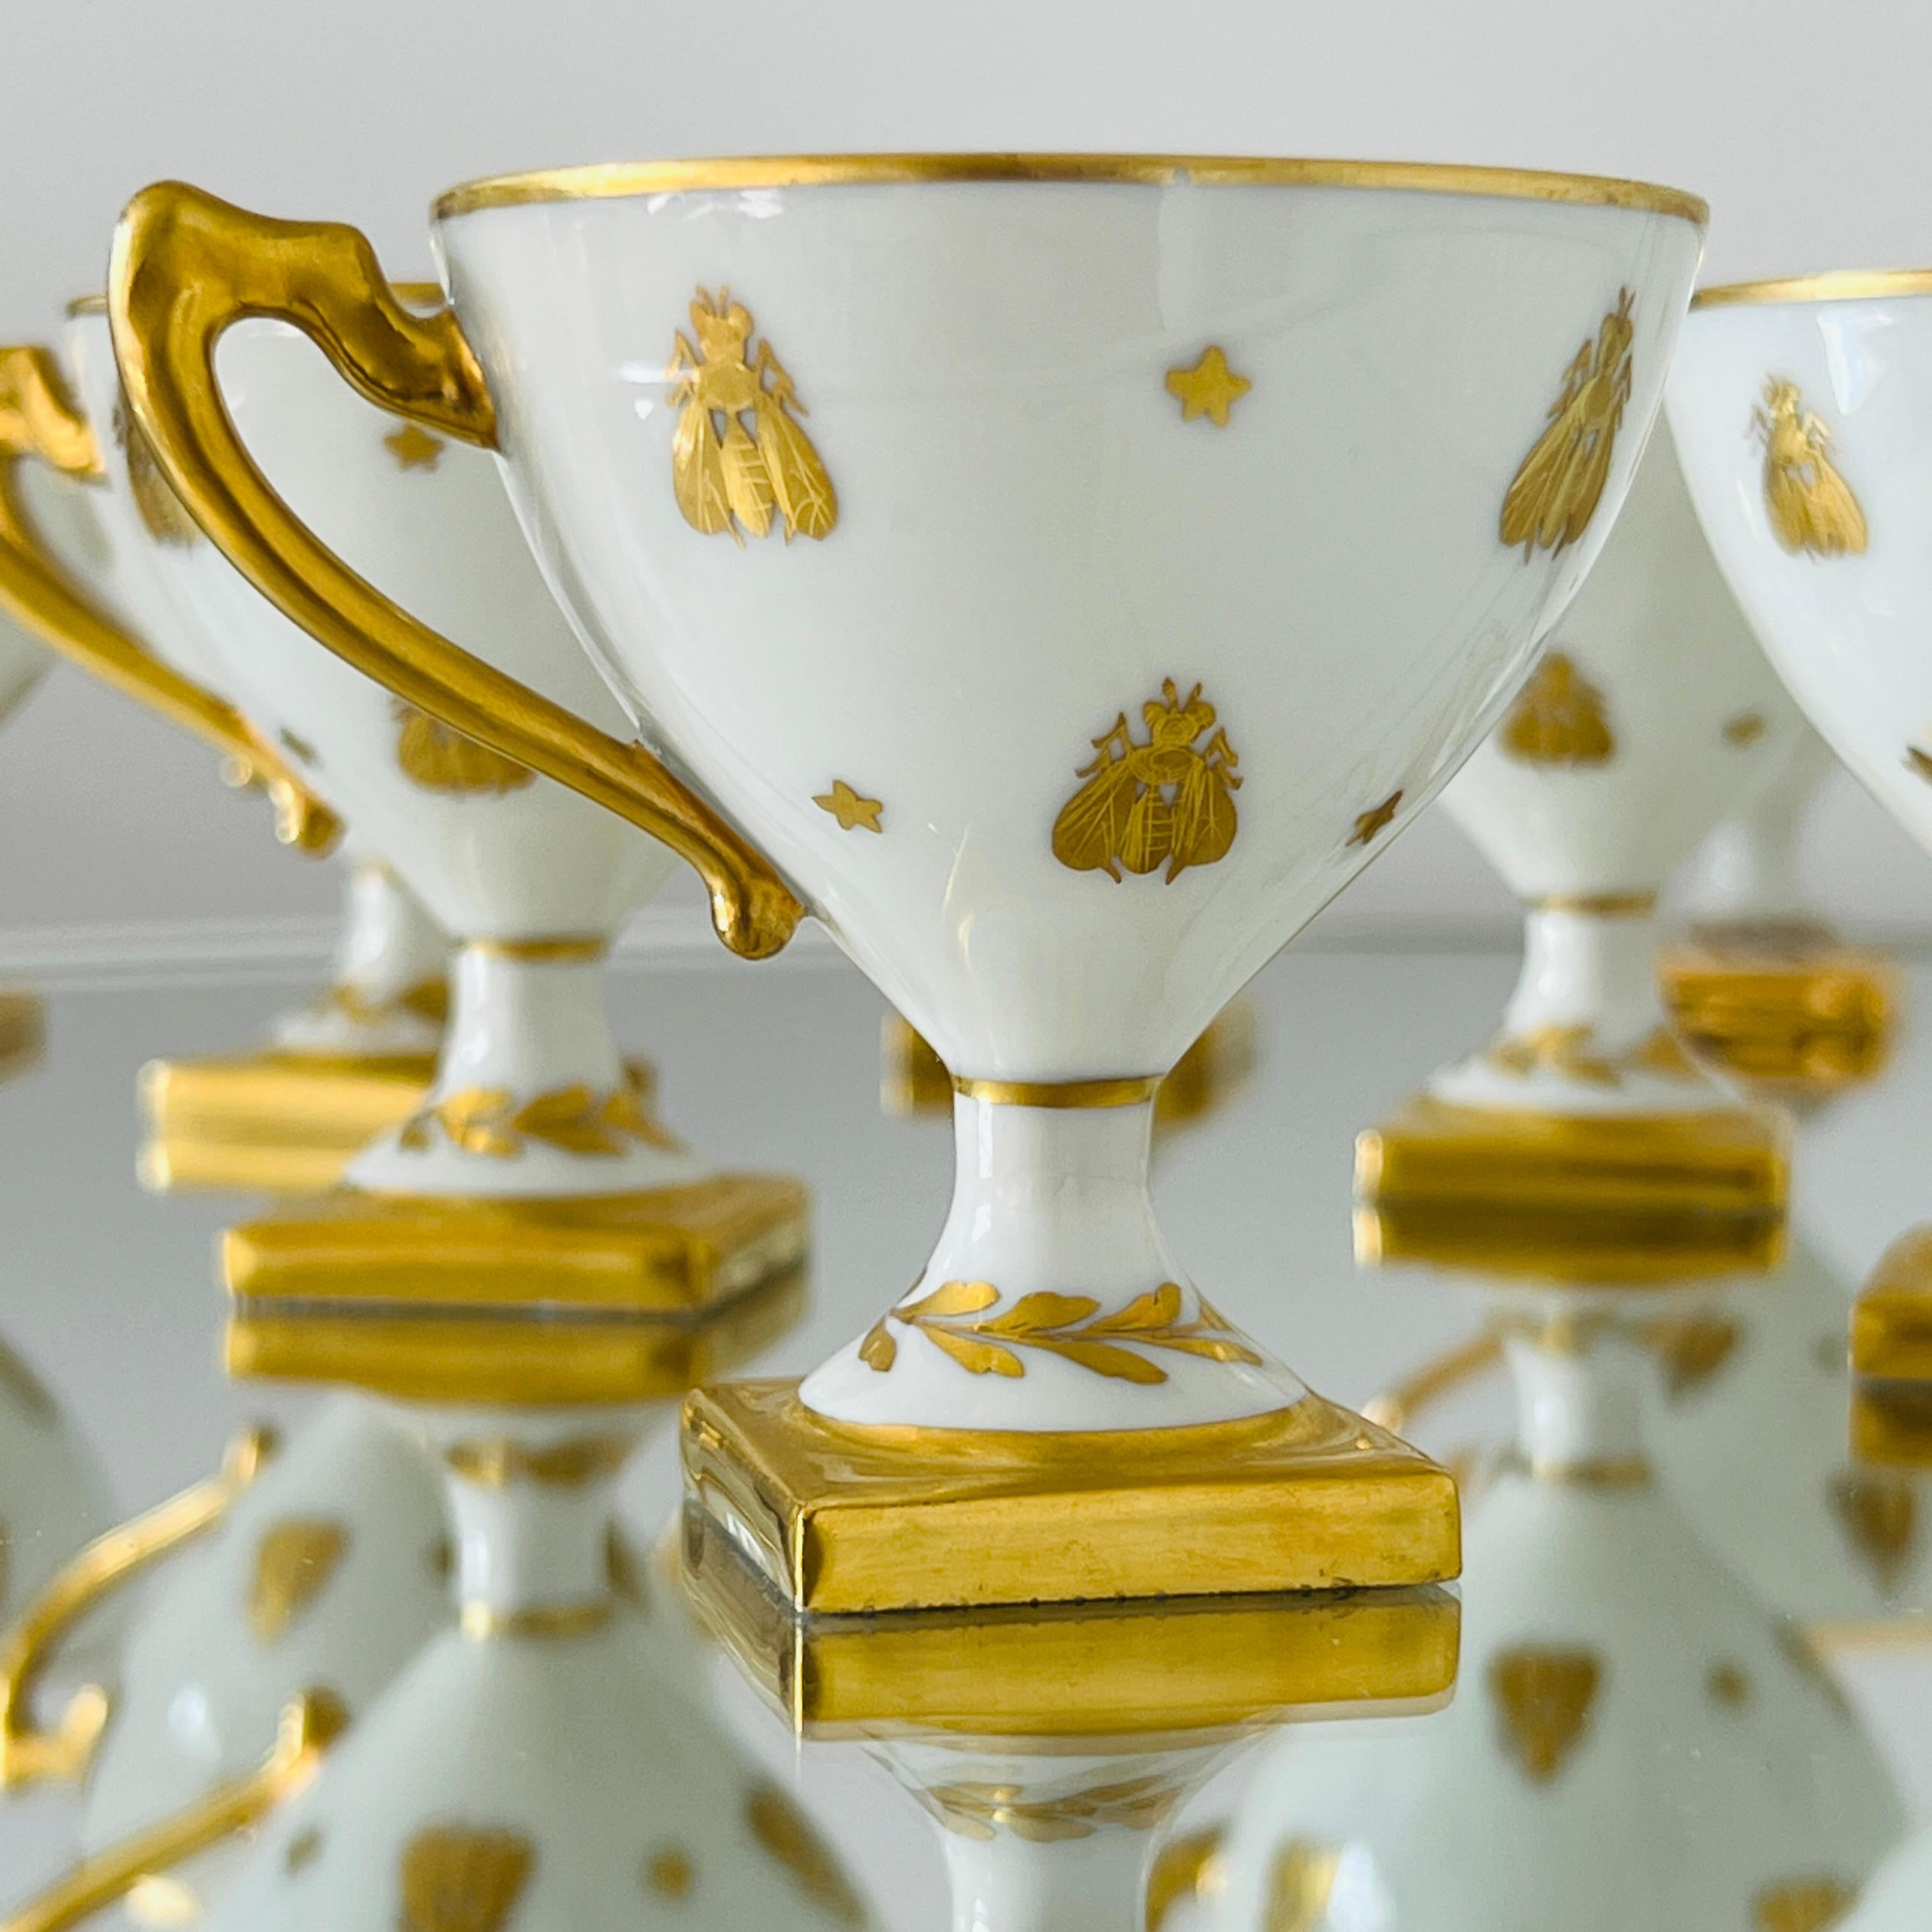 Empire Le Tallec Golden Bees Porcelain Demitasse Cups and Saucers, circa 1957 Set/11-12 For Sale